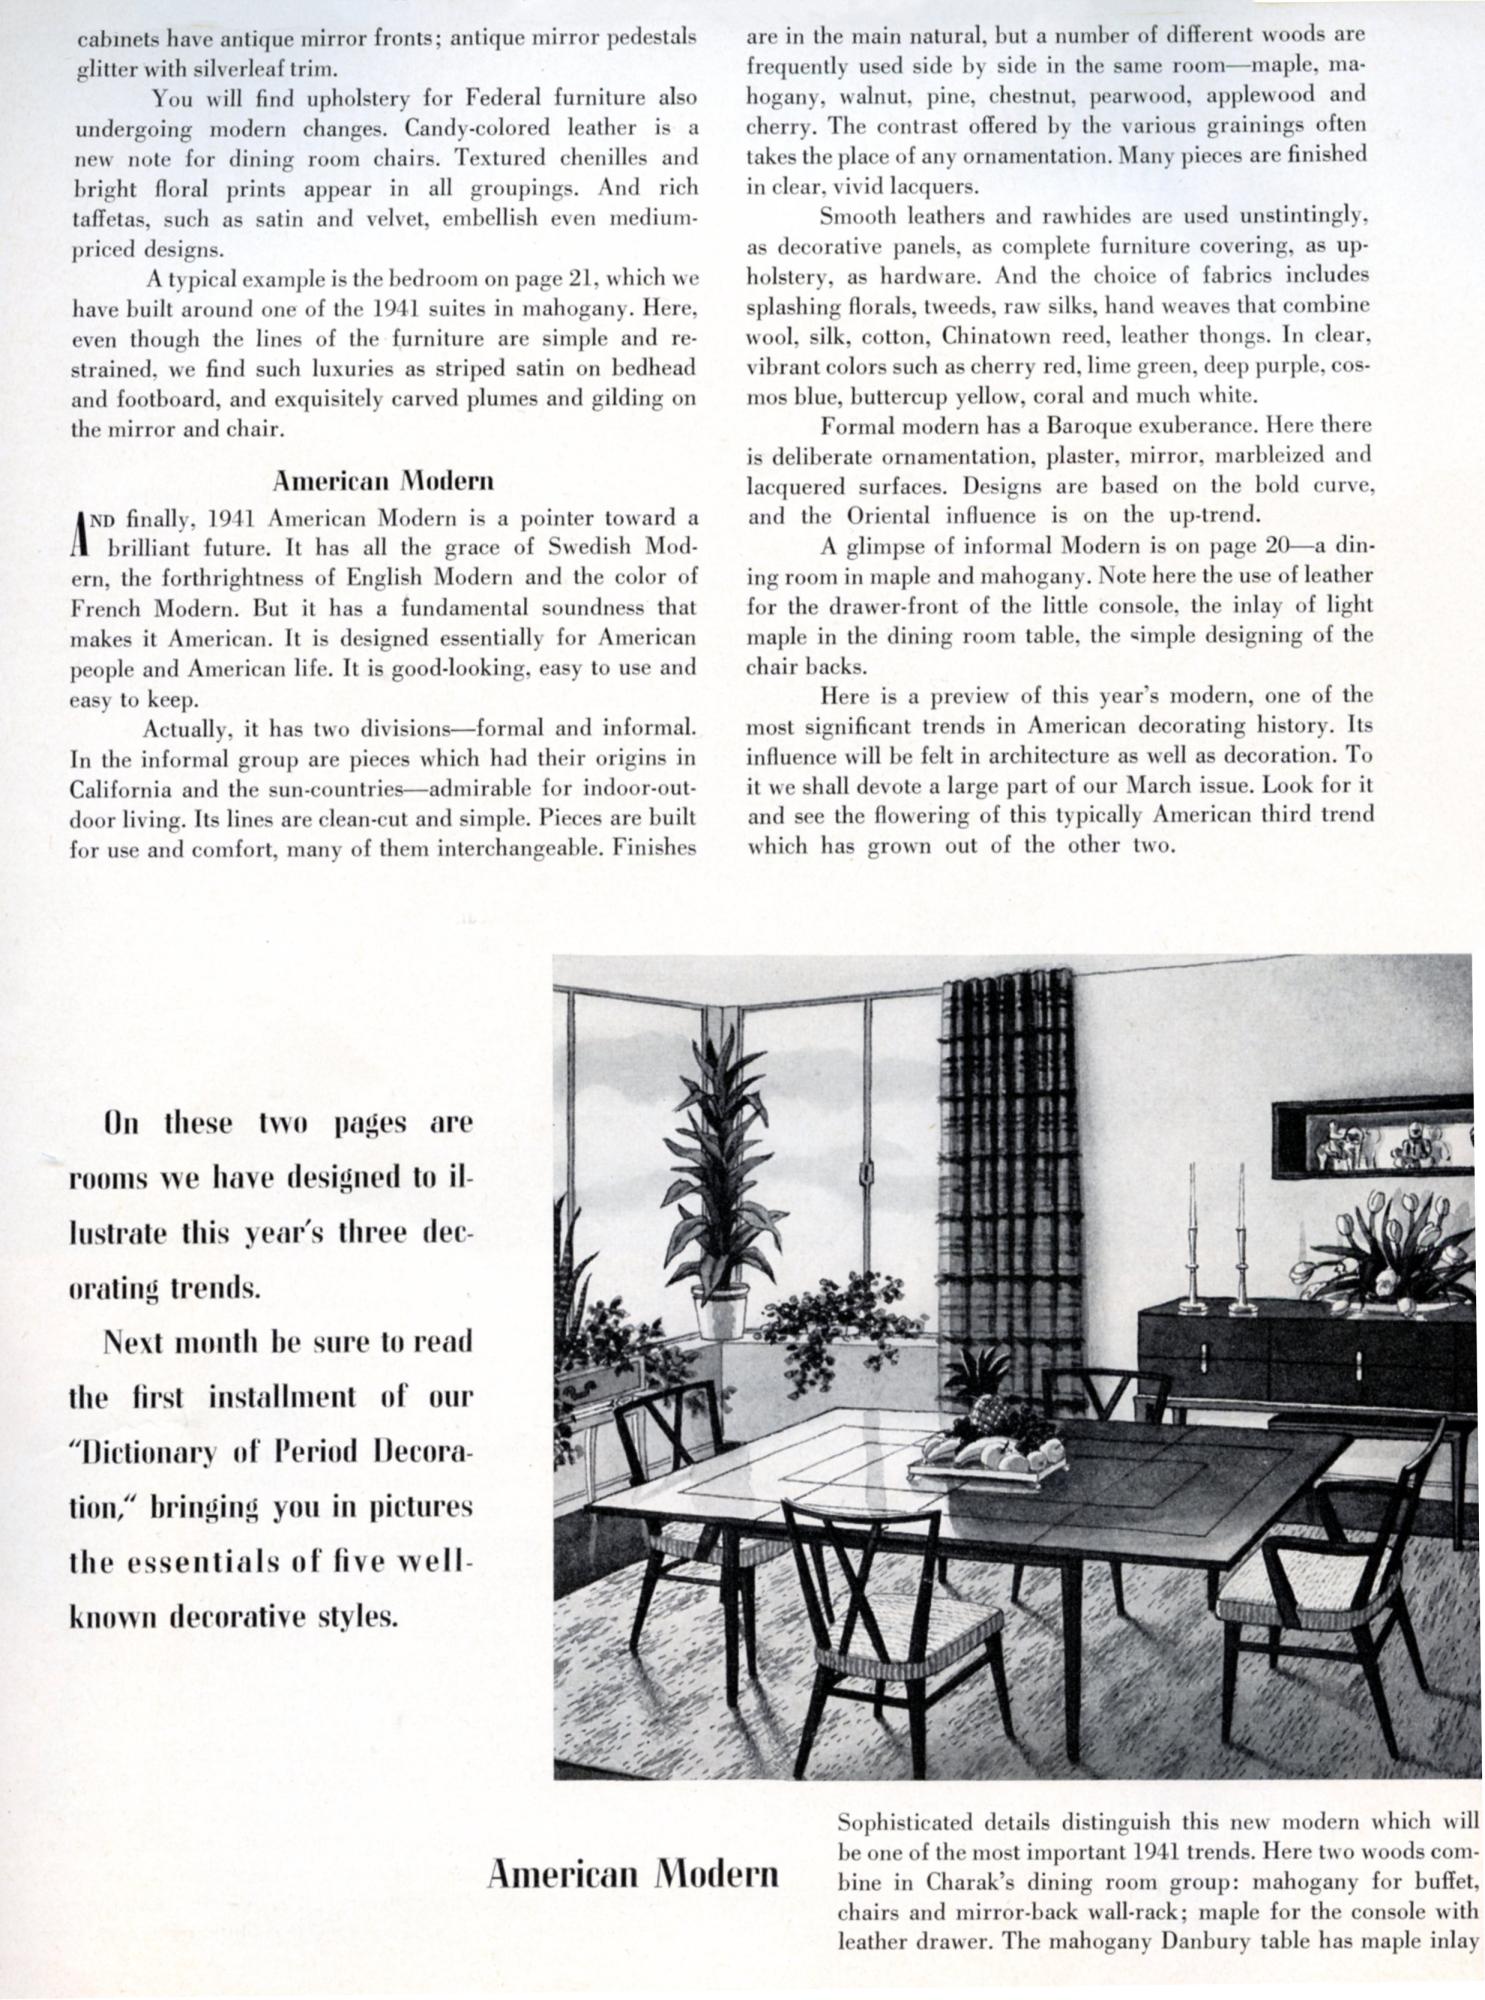 Second page of the article, featuring the American modern style